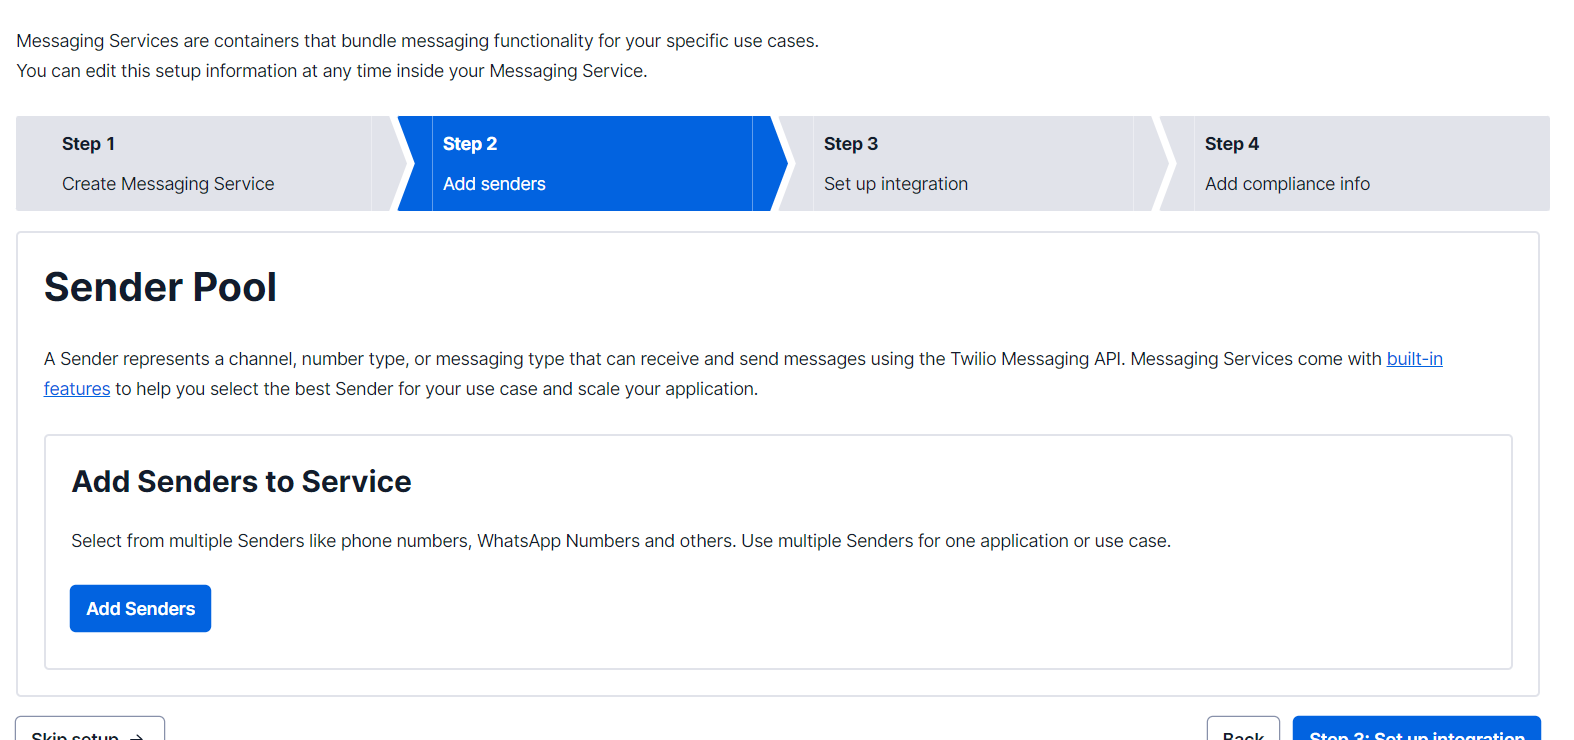 Second step in "Messaging Service Setup", to configure the Sender Pool with the option to add new senders (phone numbers, whatsapp numbers) with the "Add Senders" button, which can be used when sending messages through the Messaging Service created.